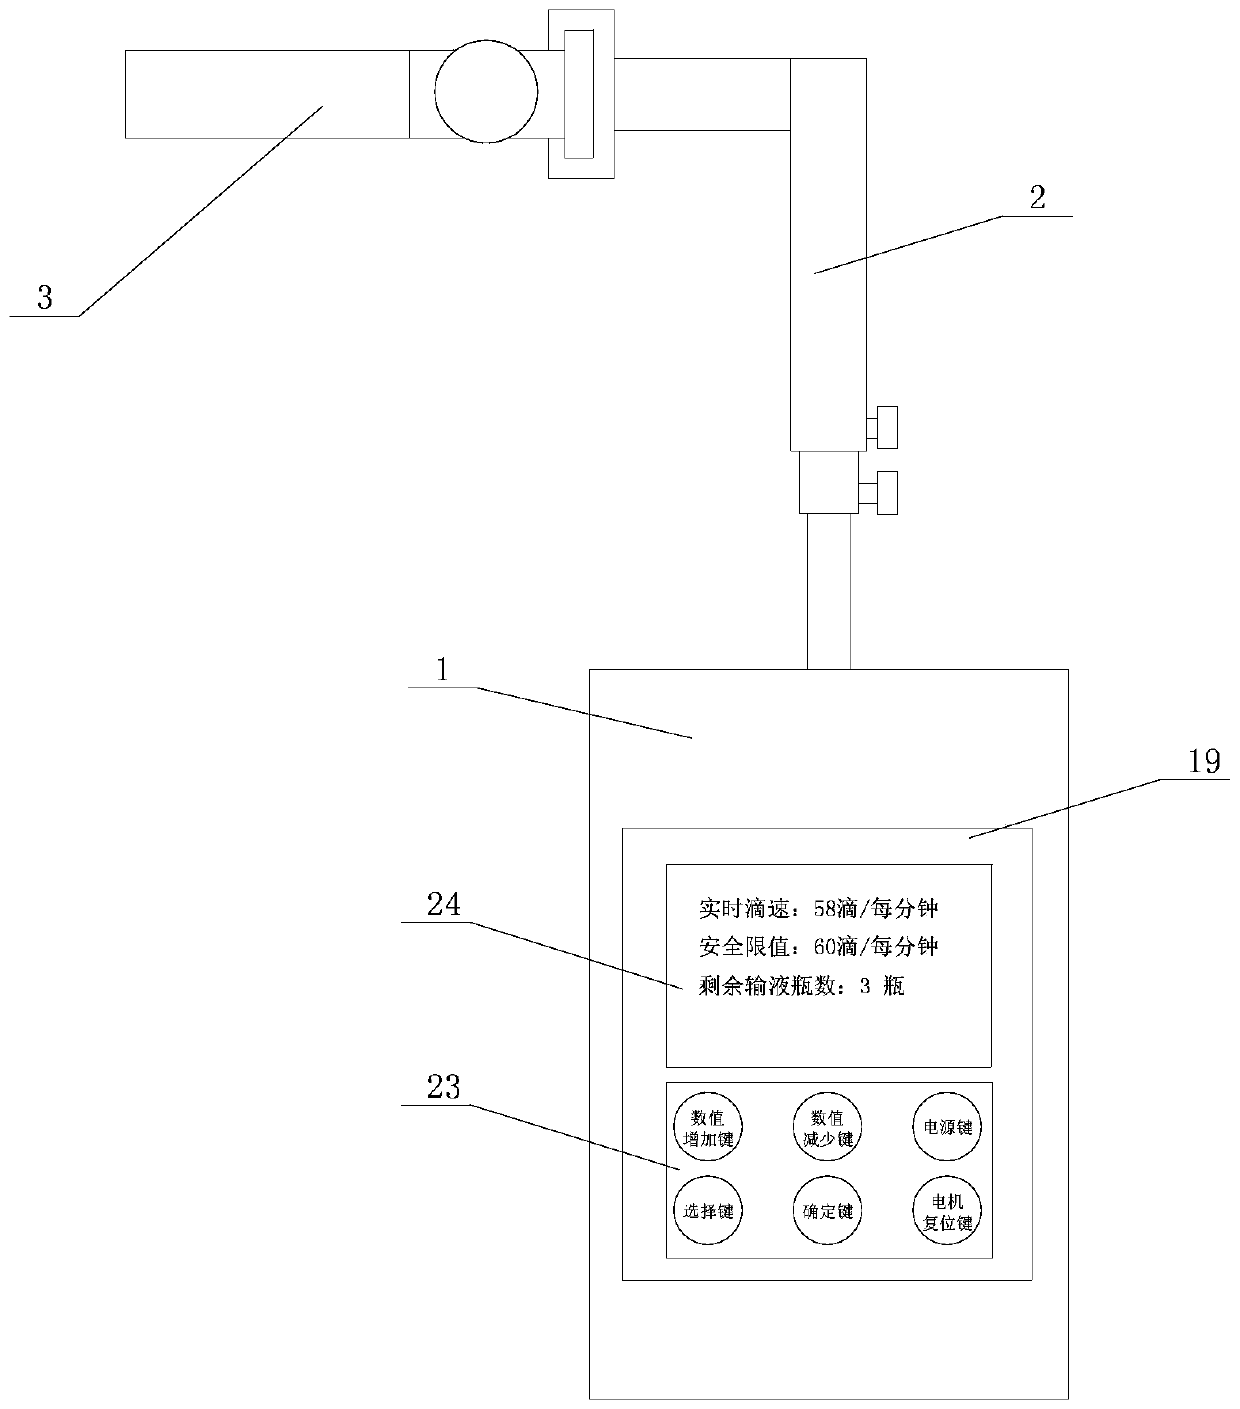 Monitoring and alarm device for intravenous infusion